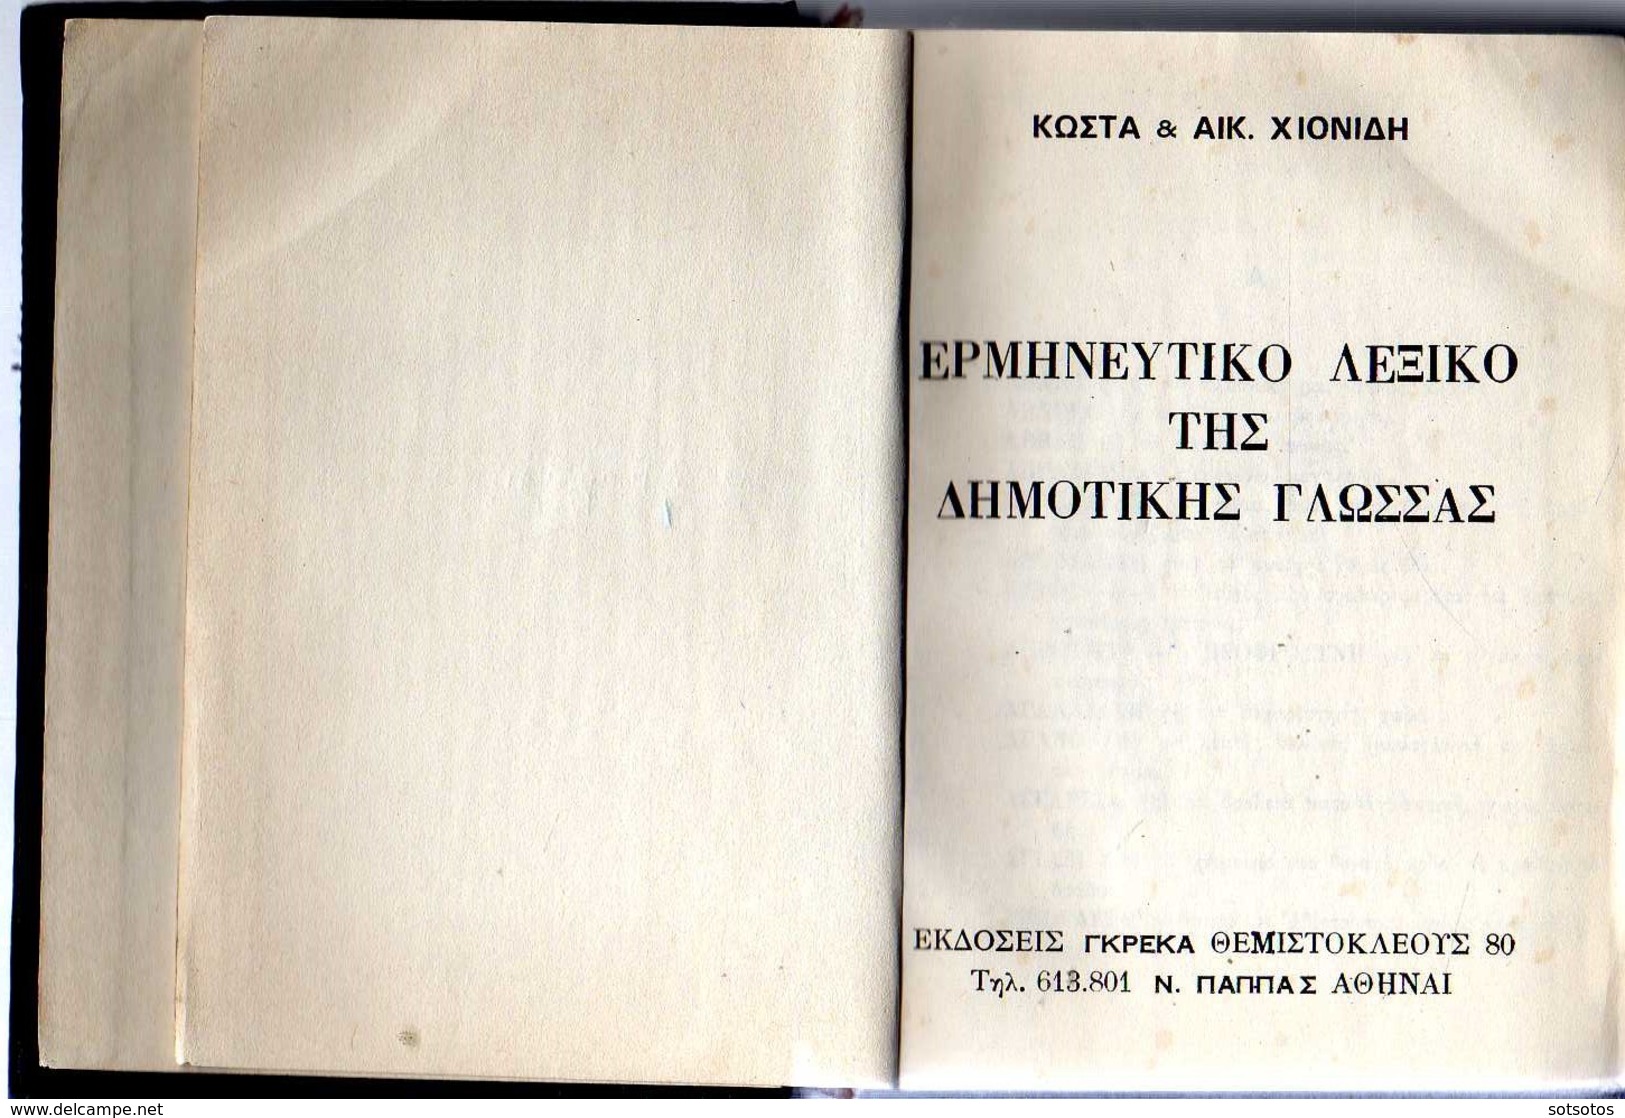 New Orthographic Lexicon Of The Greek Popular Language: K & A. HIONIDI Ed. GRECA, Leather Binding – 216 Pages In Good Co - Woordenboeken